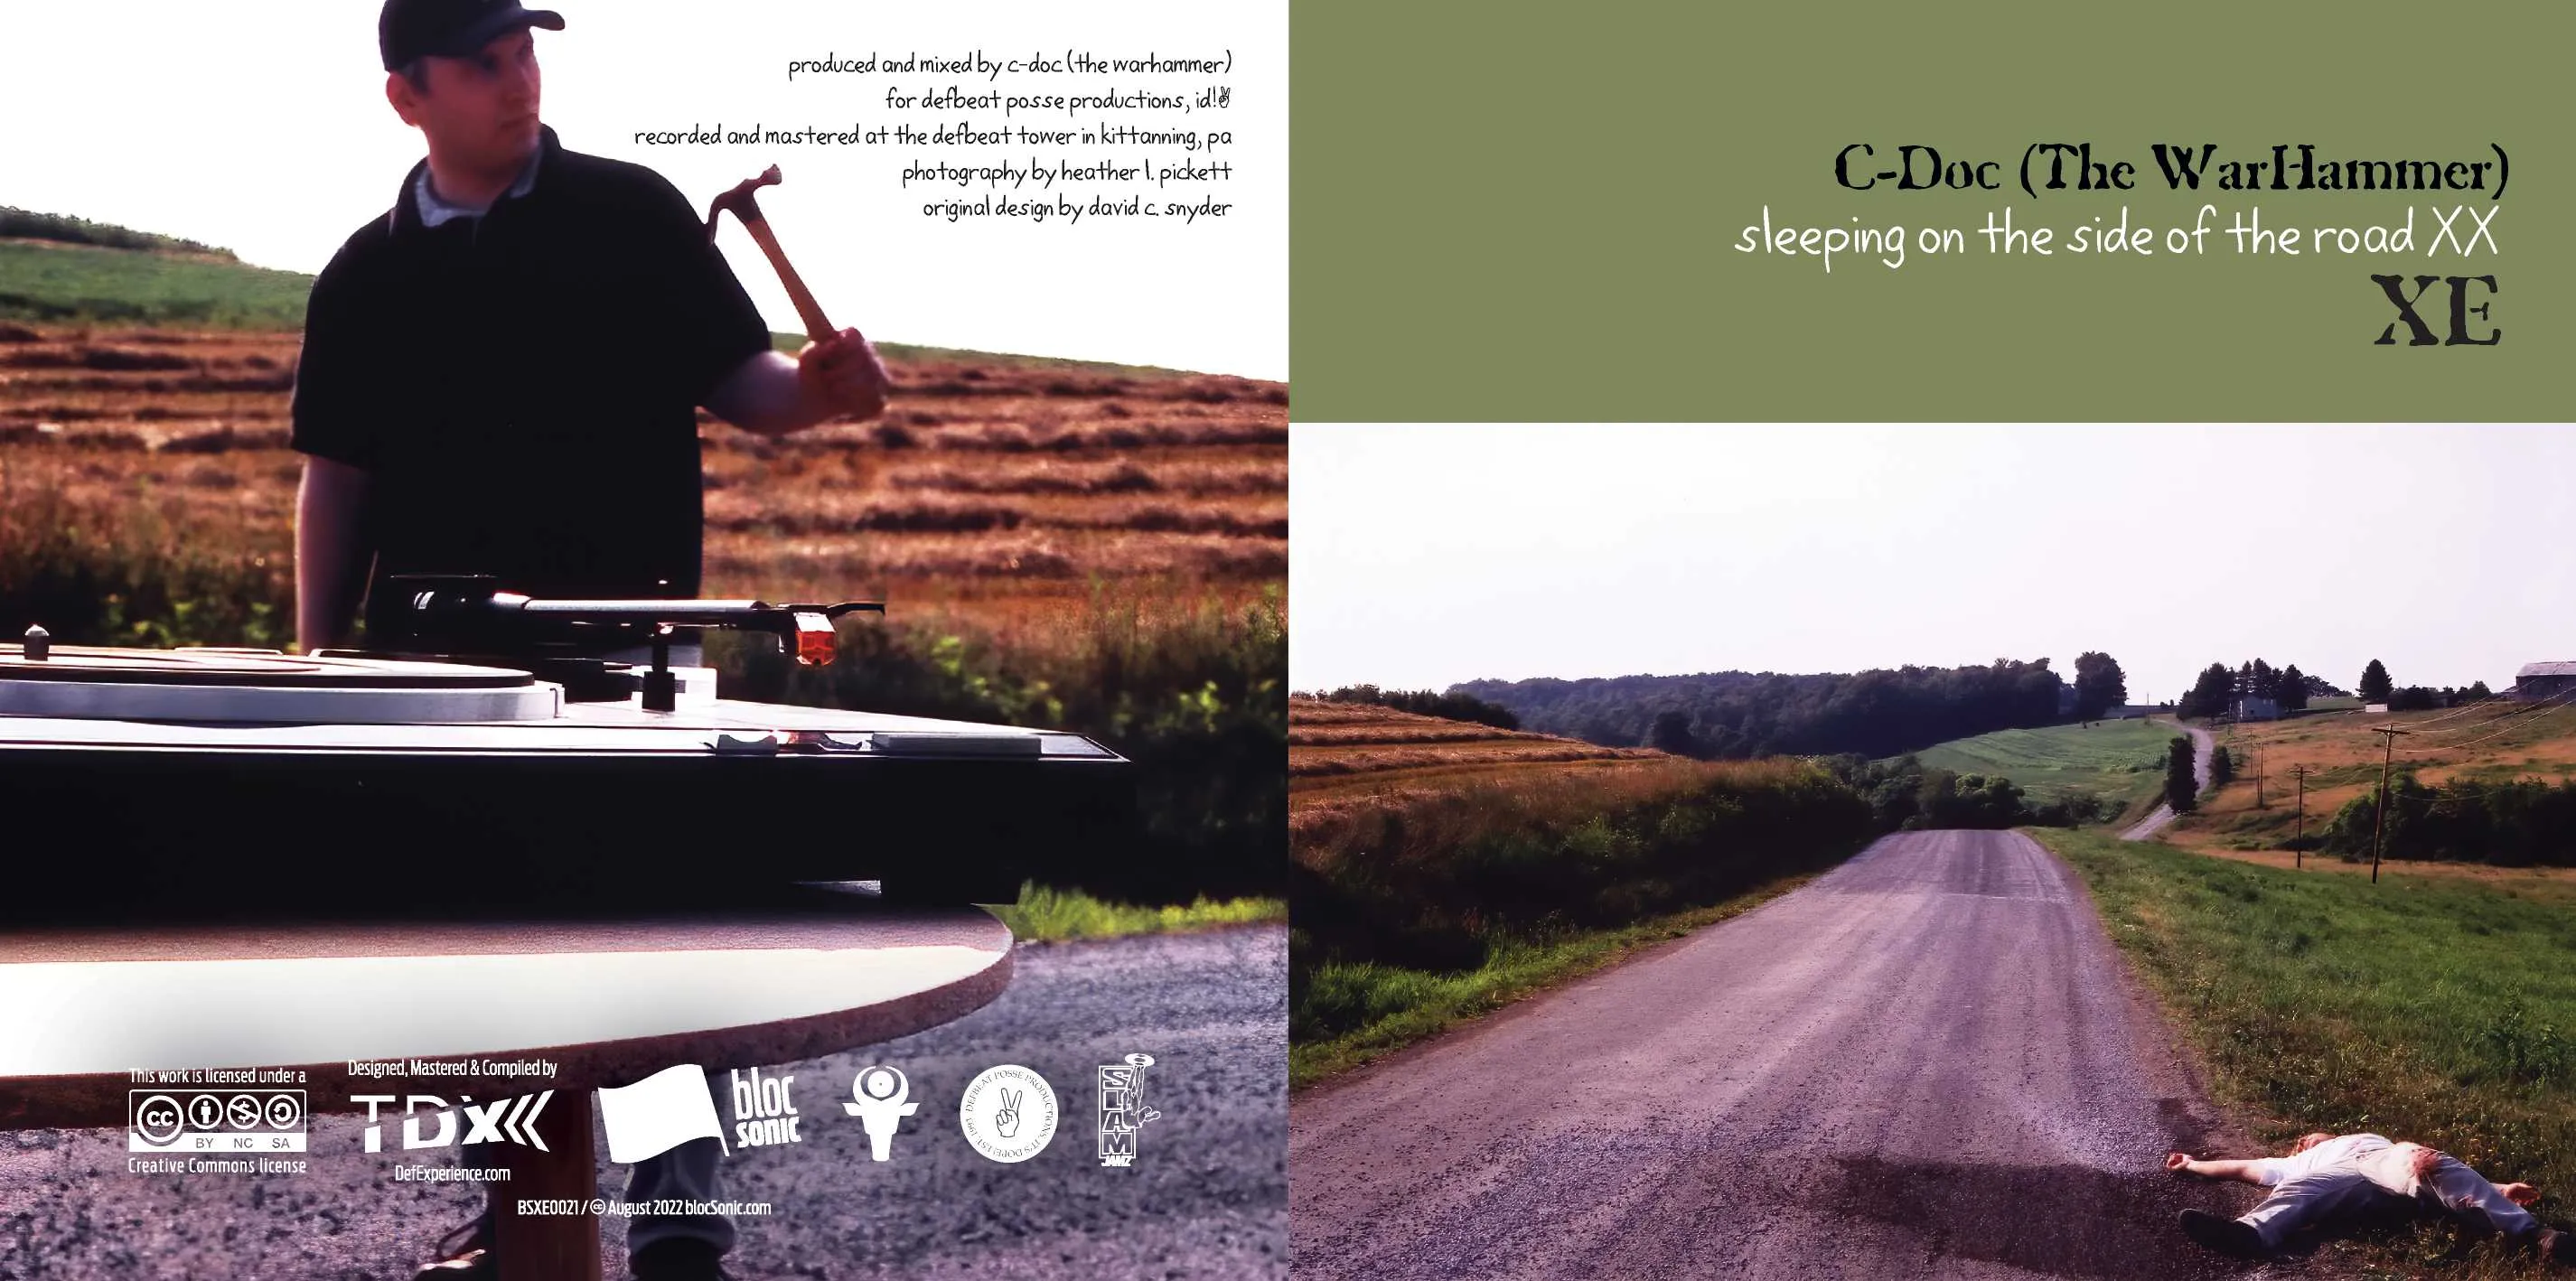 Album insert for “Sleeping On The Side Of The Road XX XE” by C-Doc